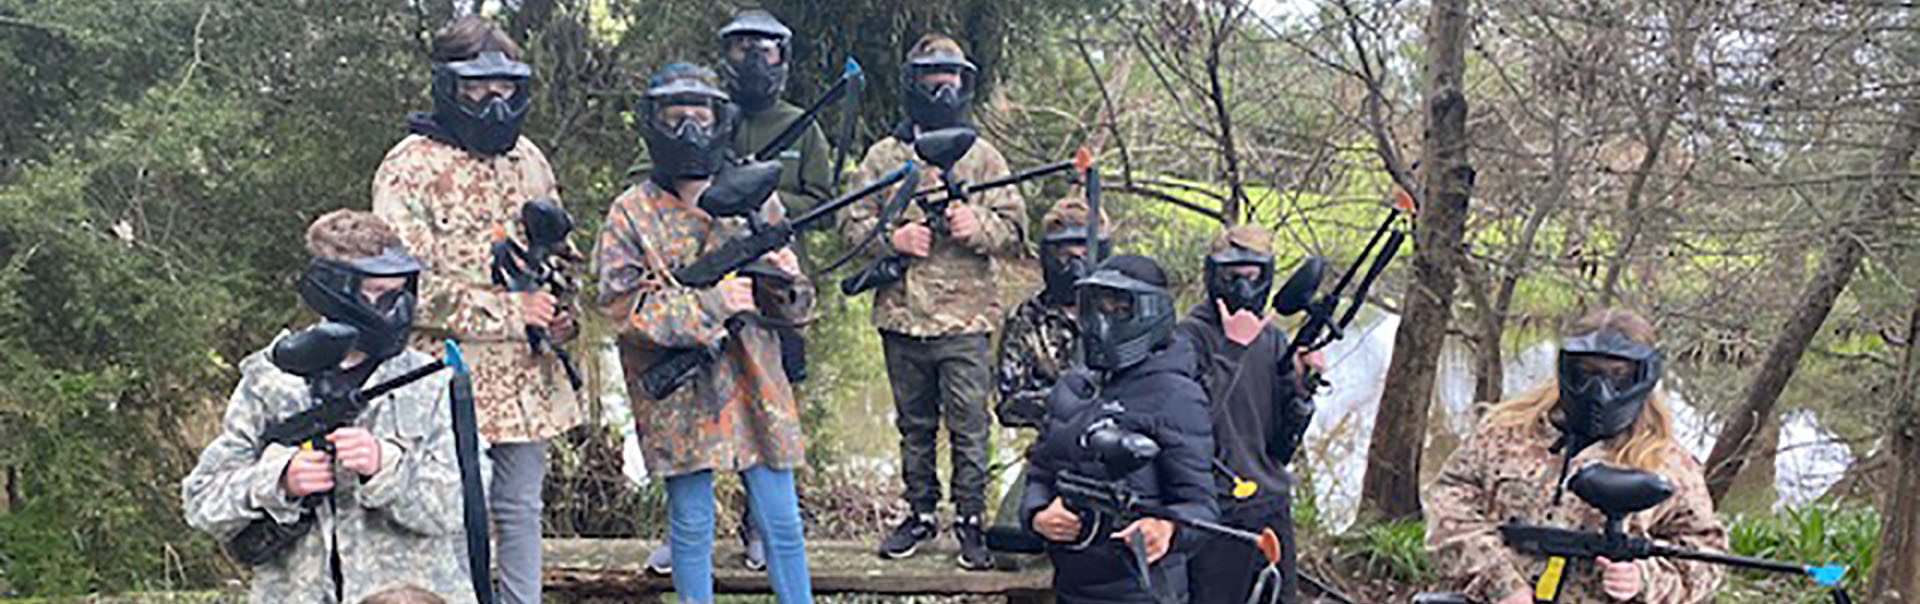 SECURE THE PERIMETER! Our Solar and Paintball Trip